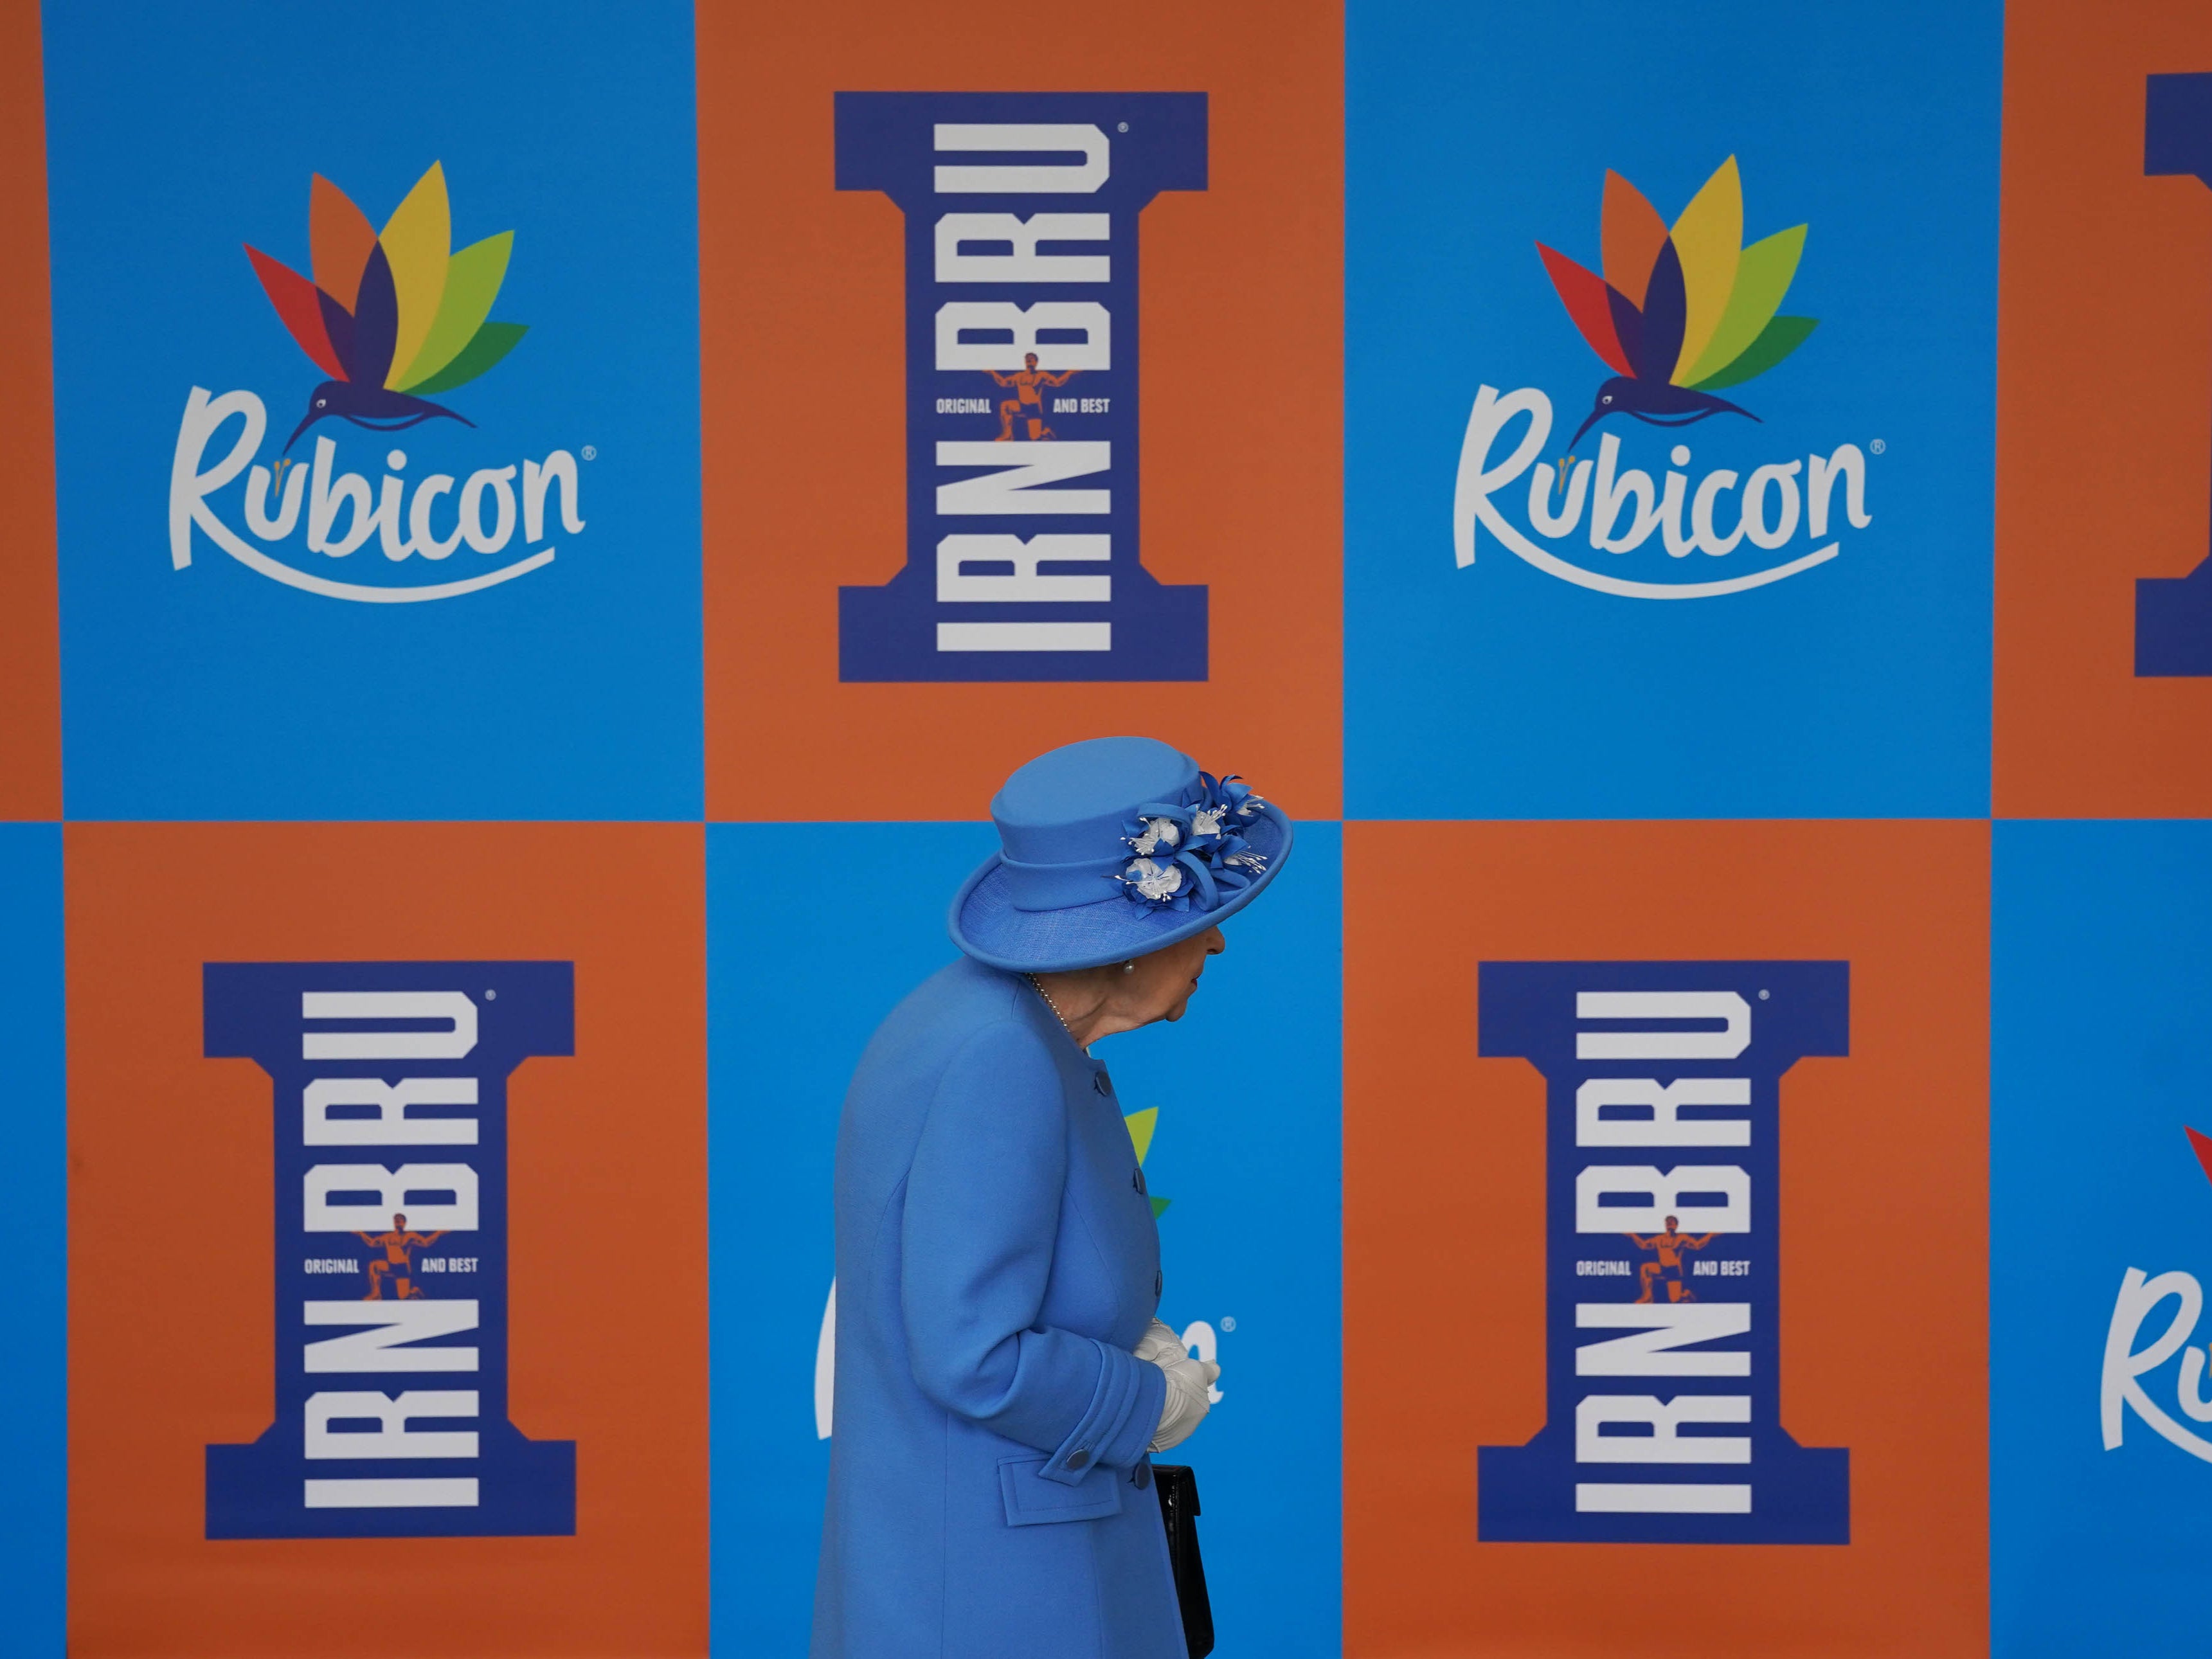 Queen Elizabeth II during a visit to AG Barr's factory in Cumbernauld, where the Irn-Bru drink is manufactured, as part of her traditional trip to Scotland for Holyrood Week